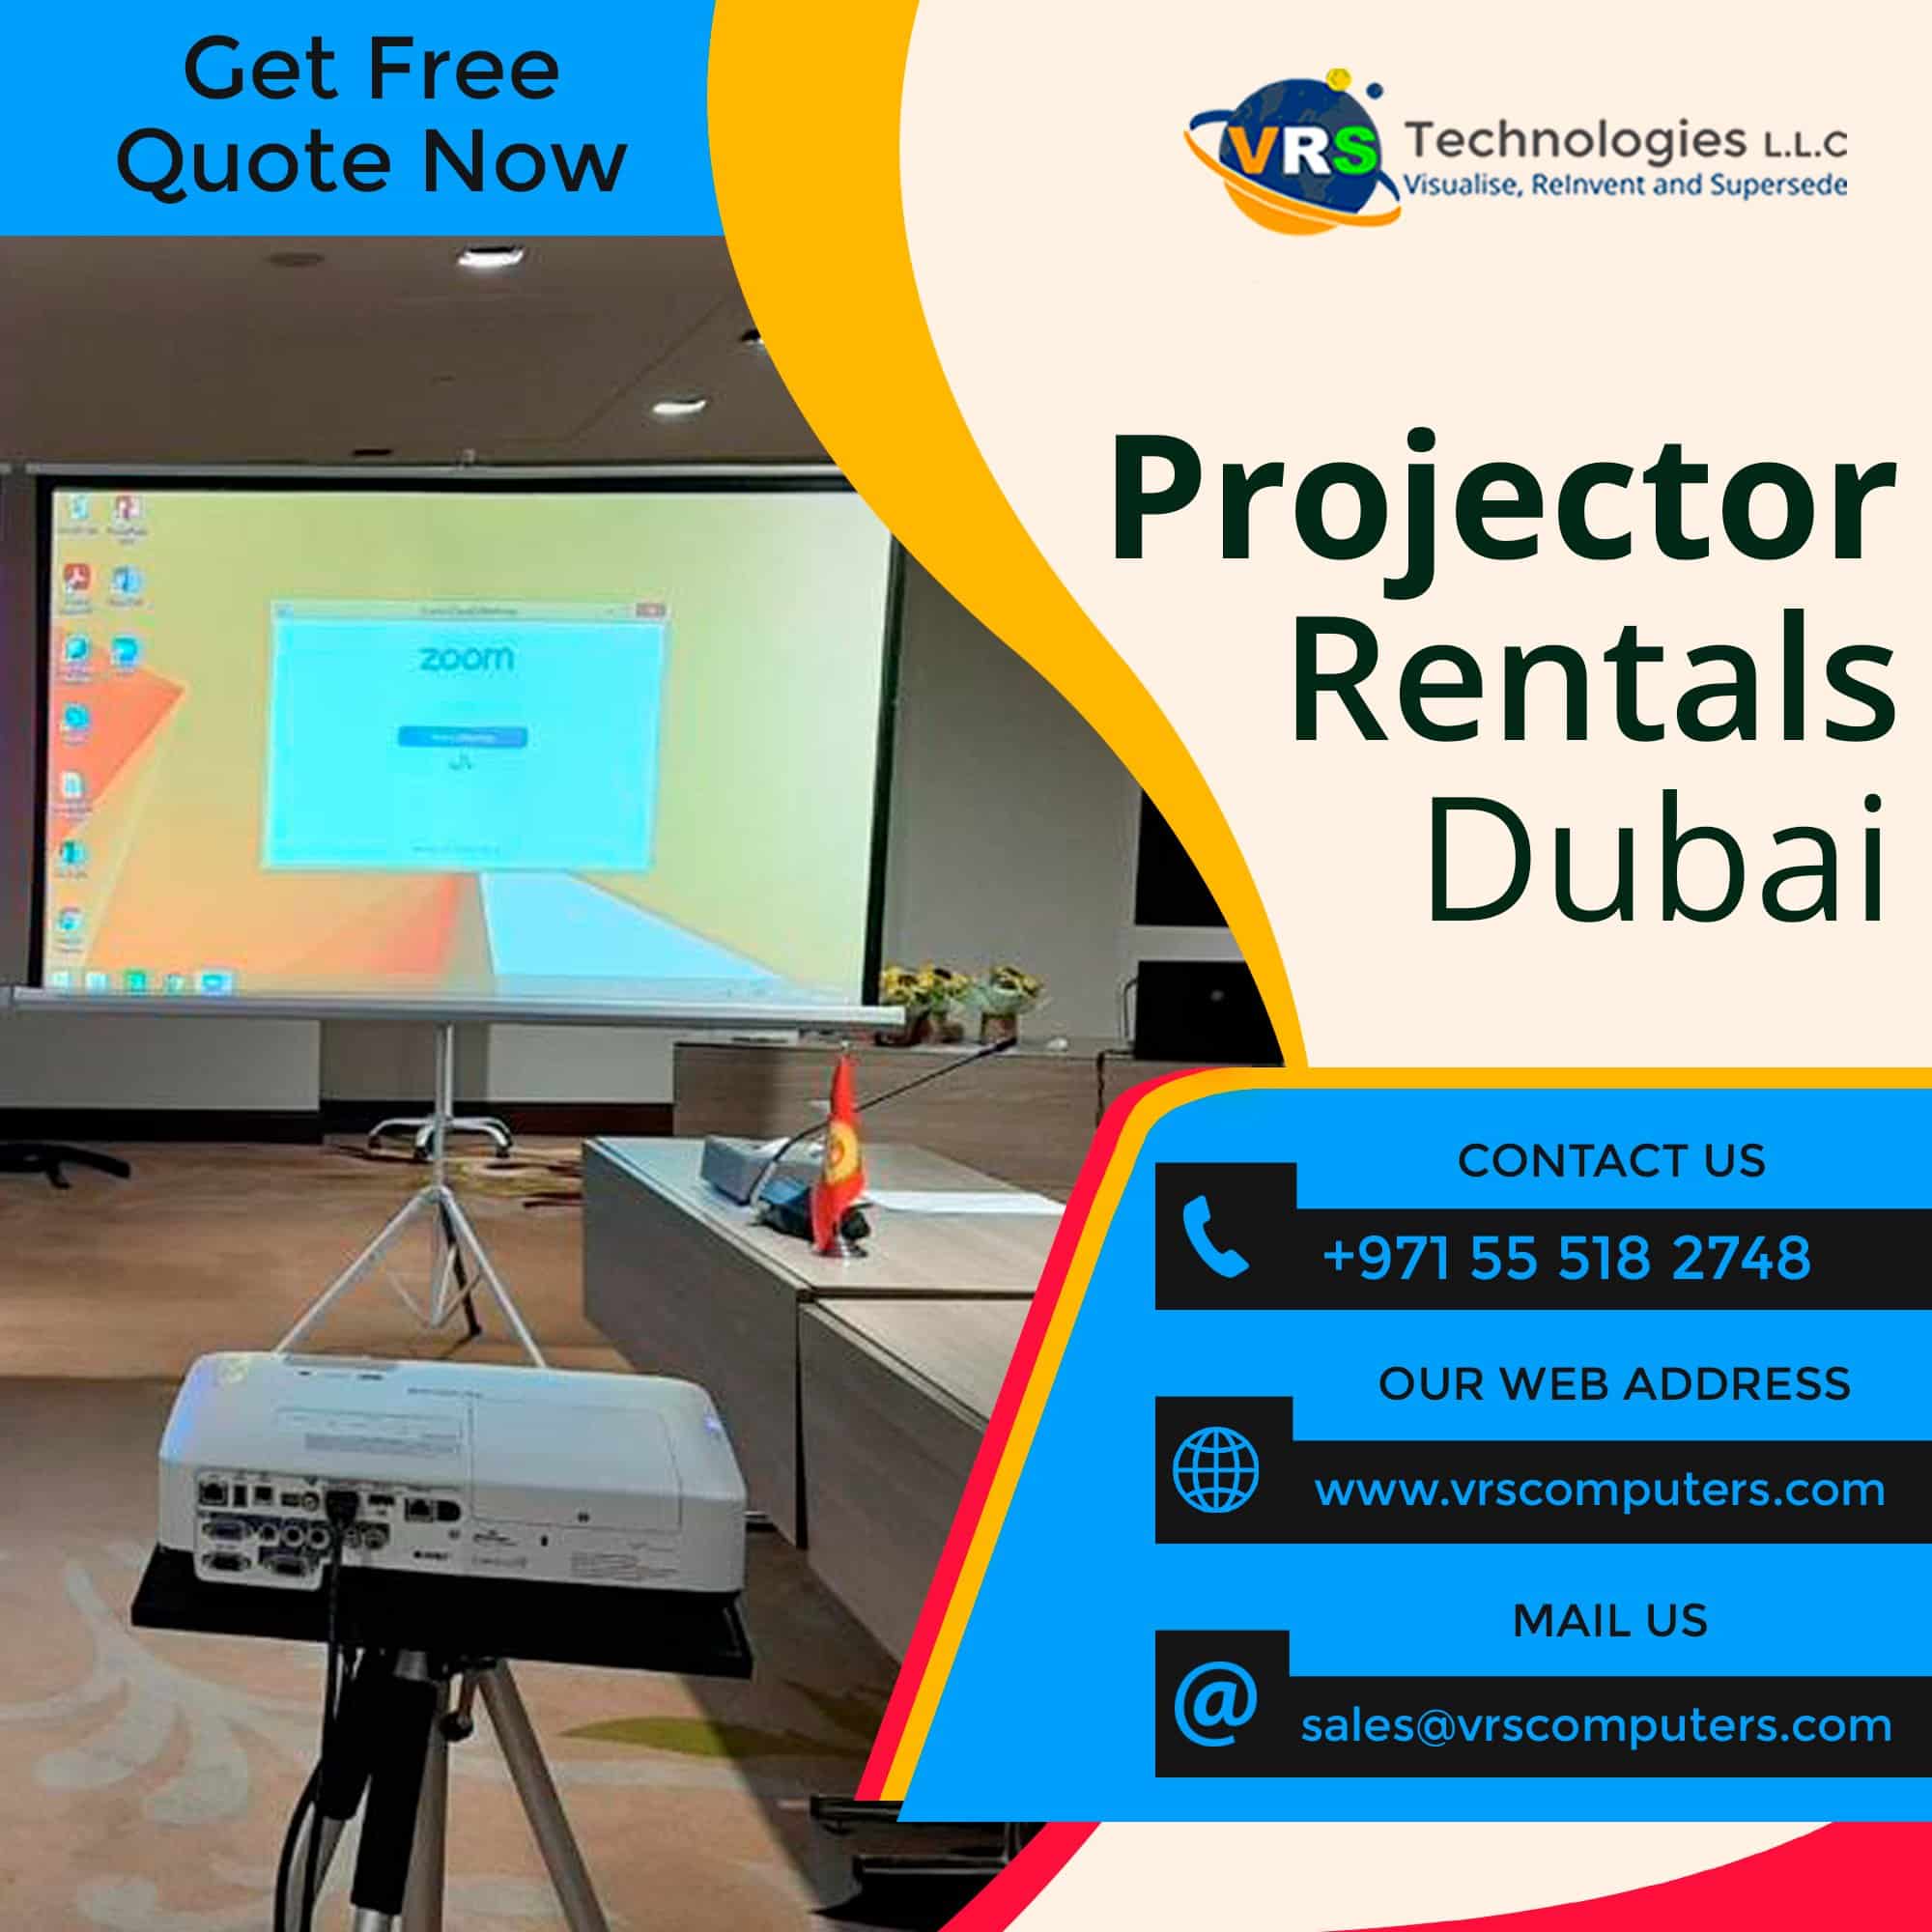 Here Are Some Benefits Of Projector Rental In Dubai